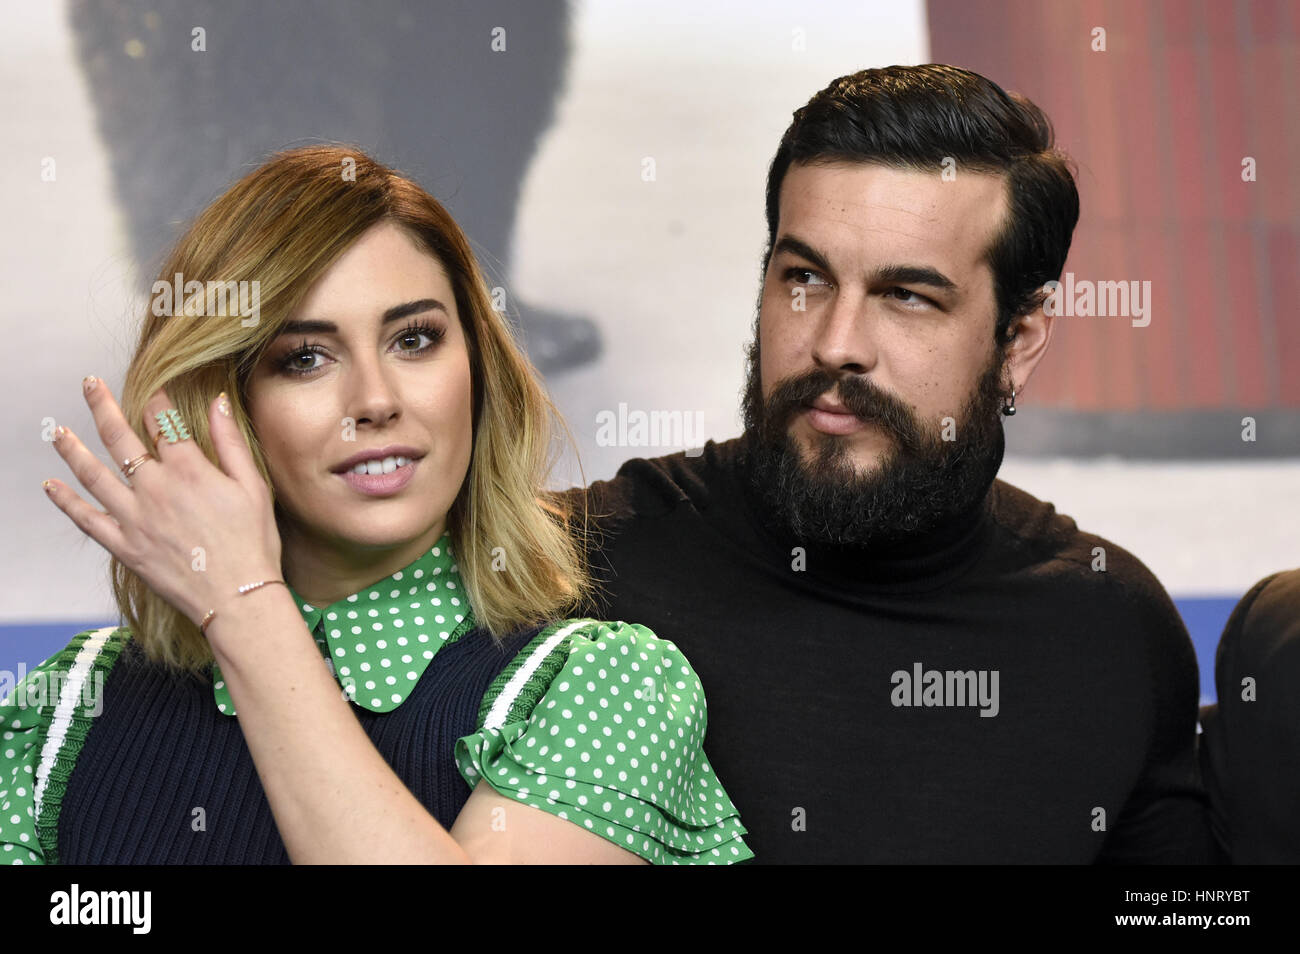 Berlin, Germany. 15th Feb, 2017. Blanca Suarez and Mario Casas during the  'El Bar/The Bar' press conference at the 67th Berlin International Film  Festival/Berlinale 2017 on February 15, 2017 in Berlin, Germany.